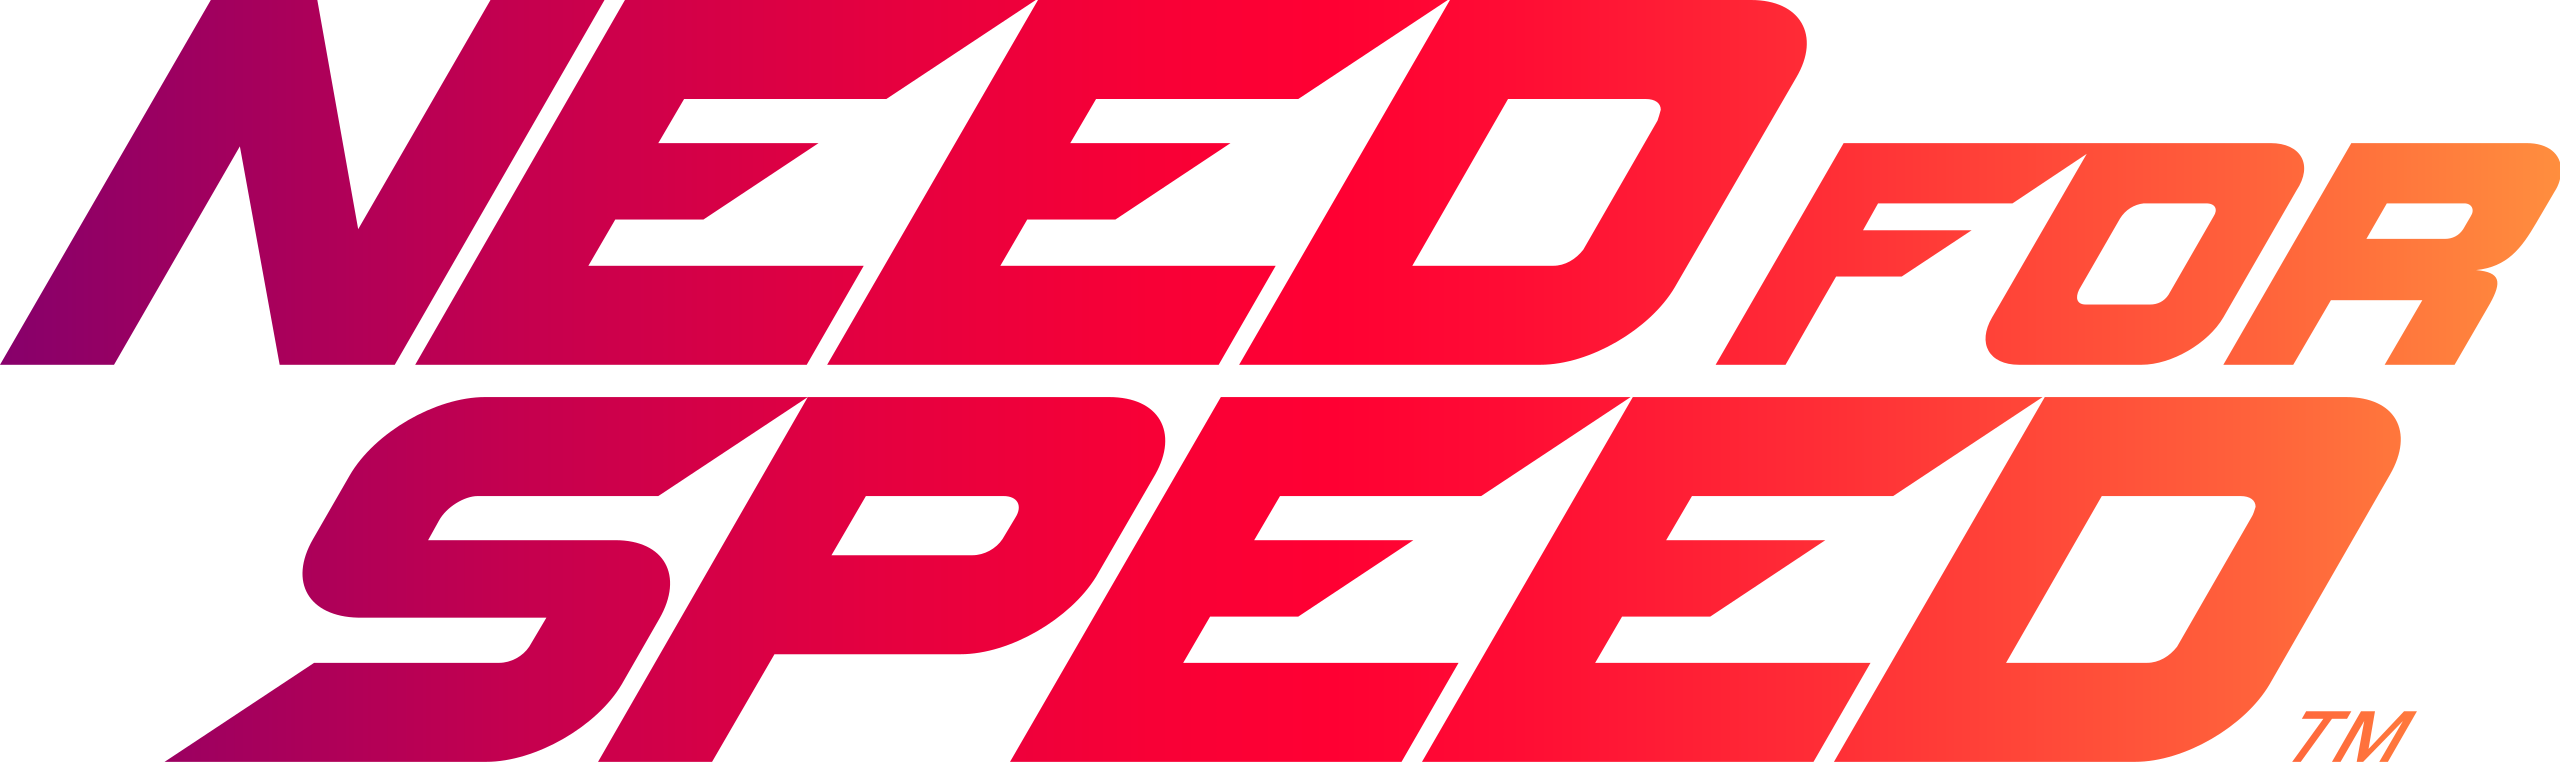 need for speed logo png